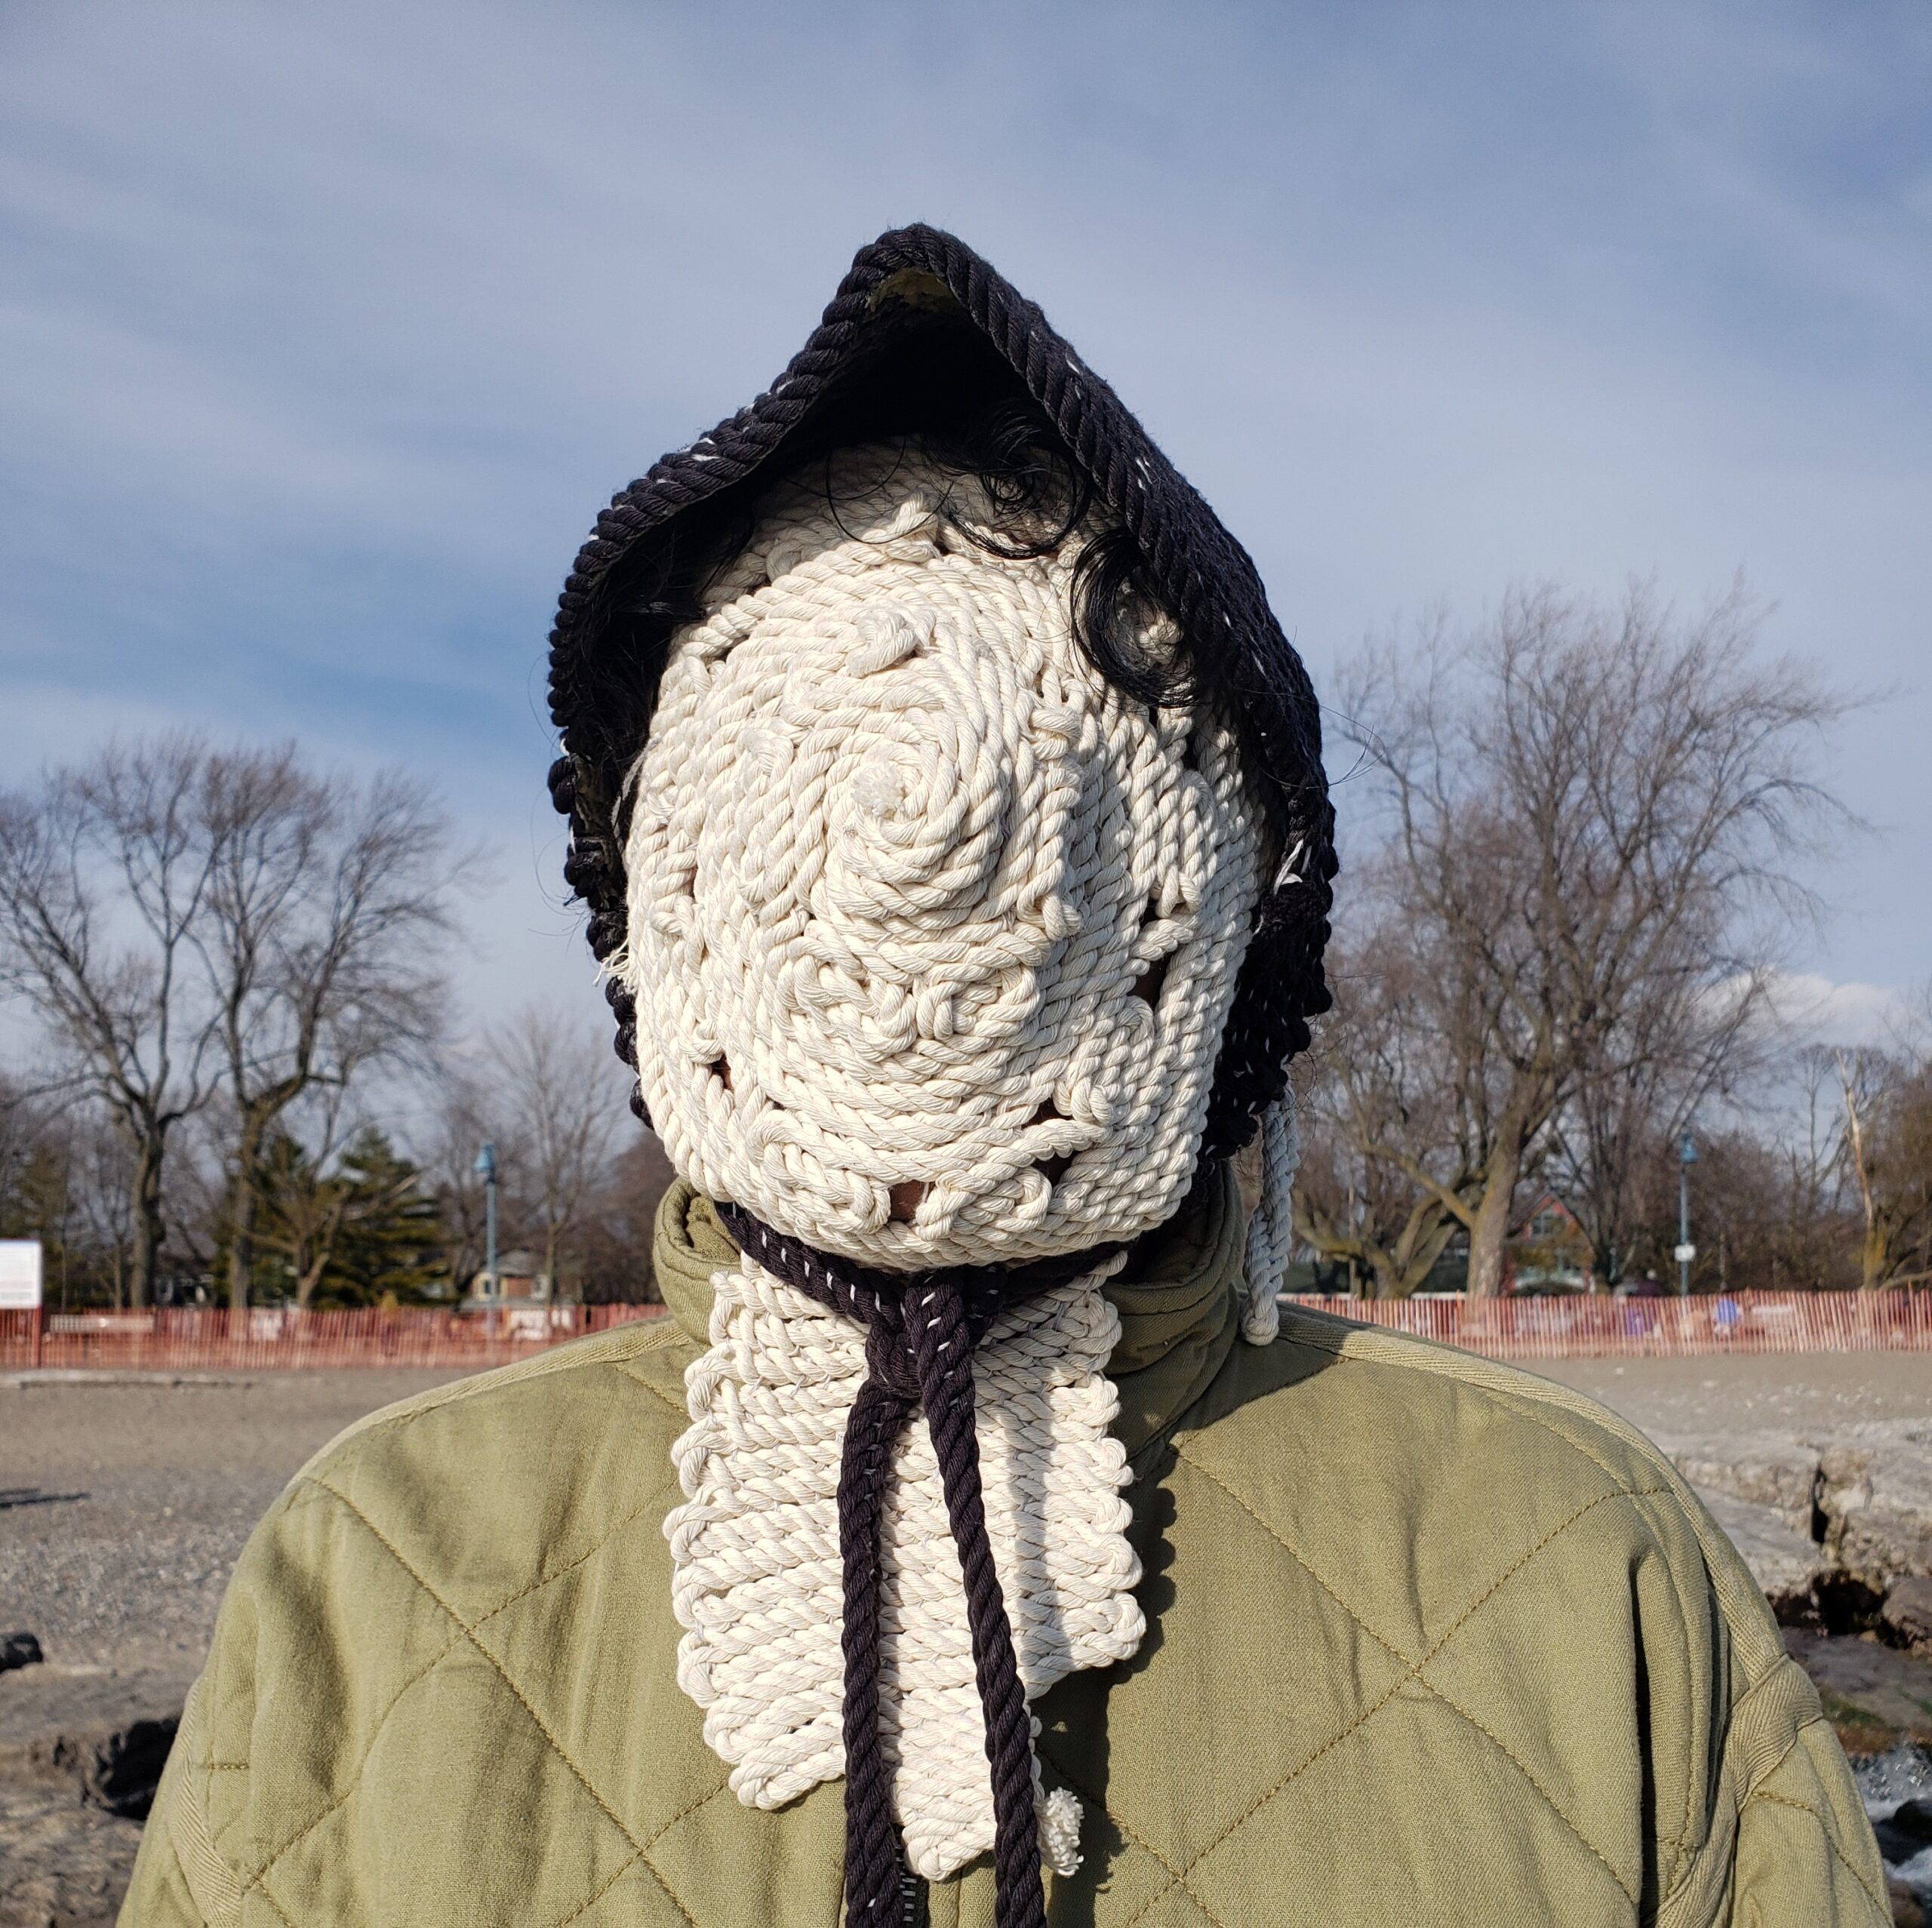 Akash is outdoors, wearing a green sweater and their face and neck is completely covered by a textile mask of thick white rope that is stitched together in a circular pattern. They are wearing a black bonnet made of similar thick rope.